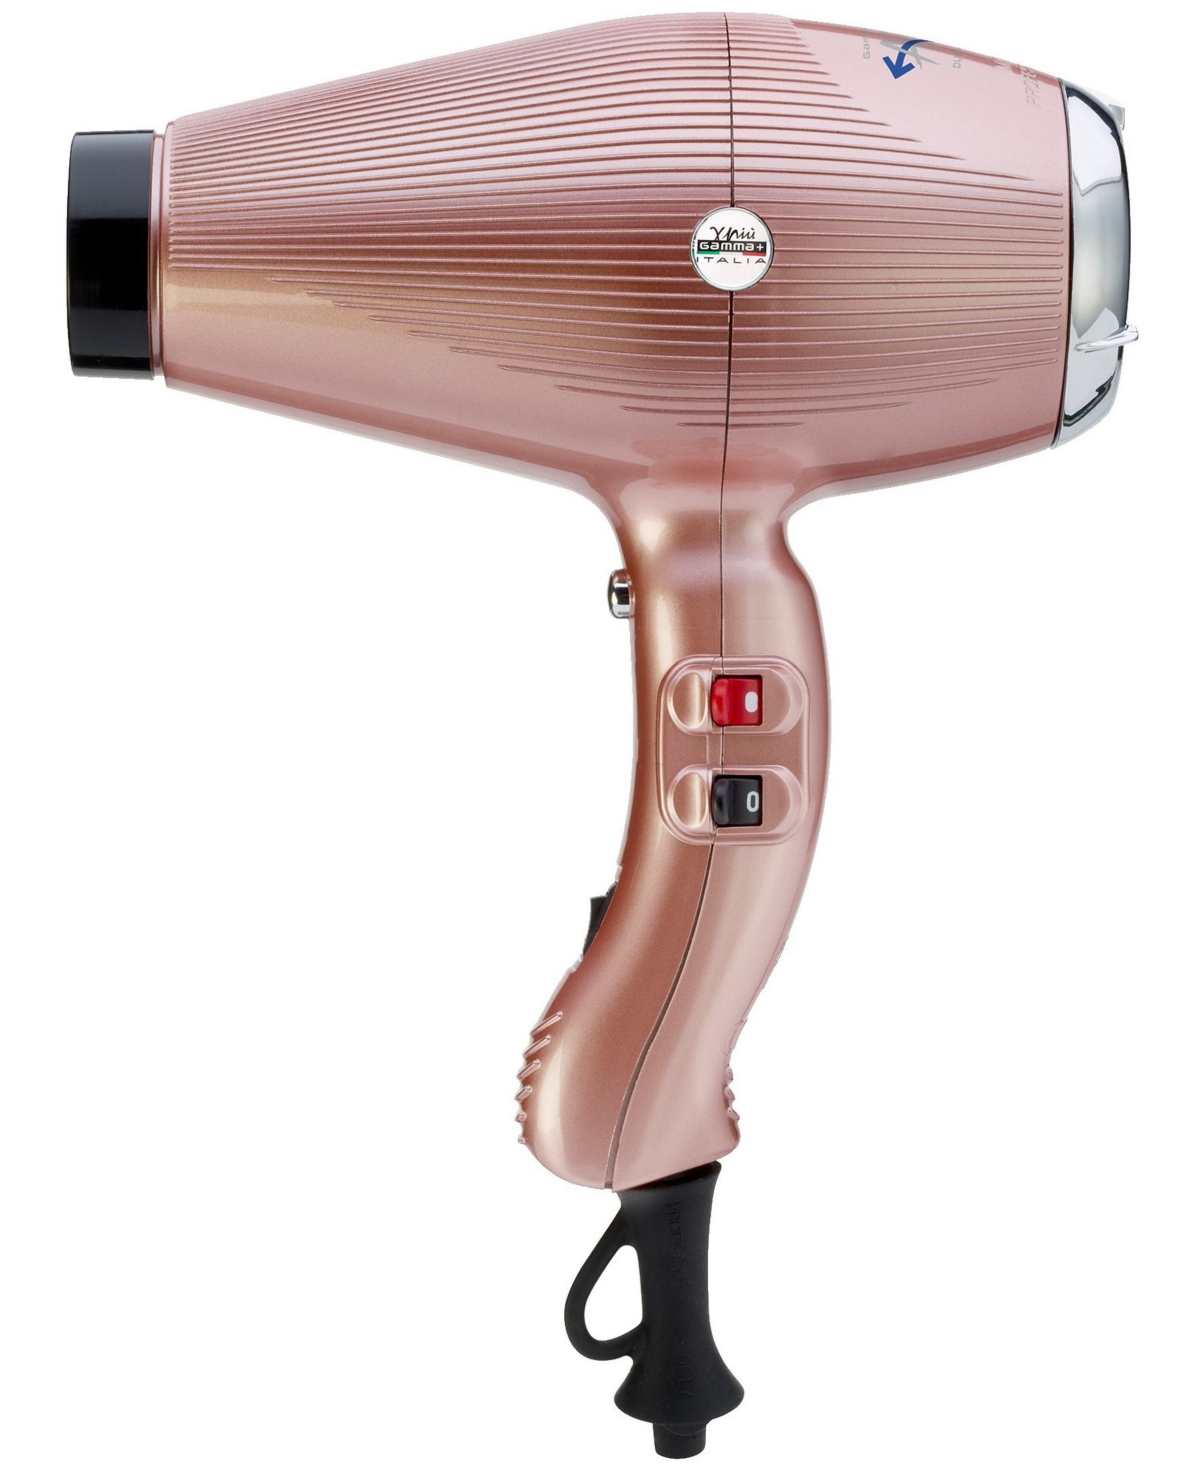 Aria Dual Ionic Professional Ultralight Hair Dryer - Pink